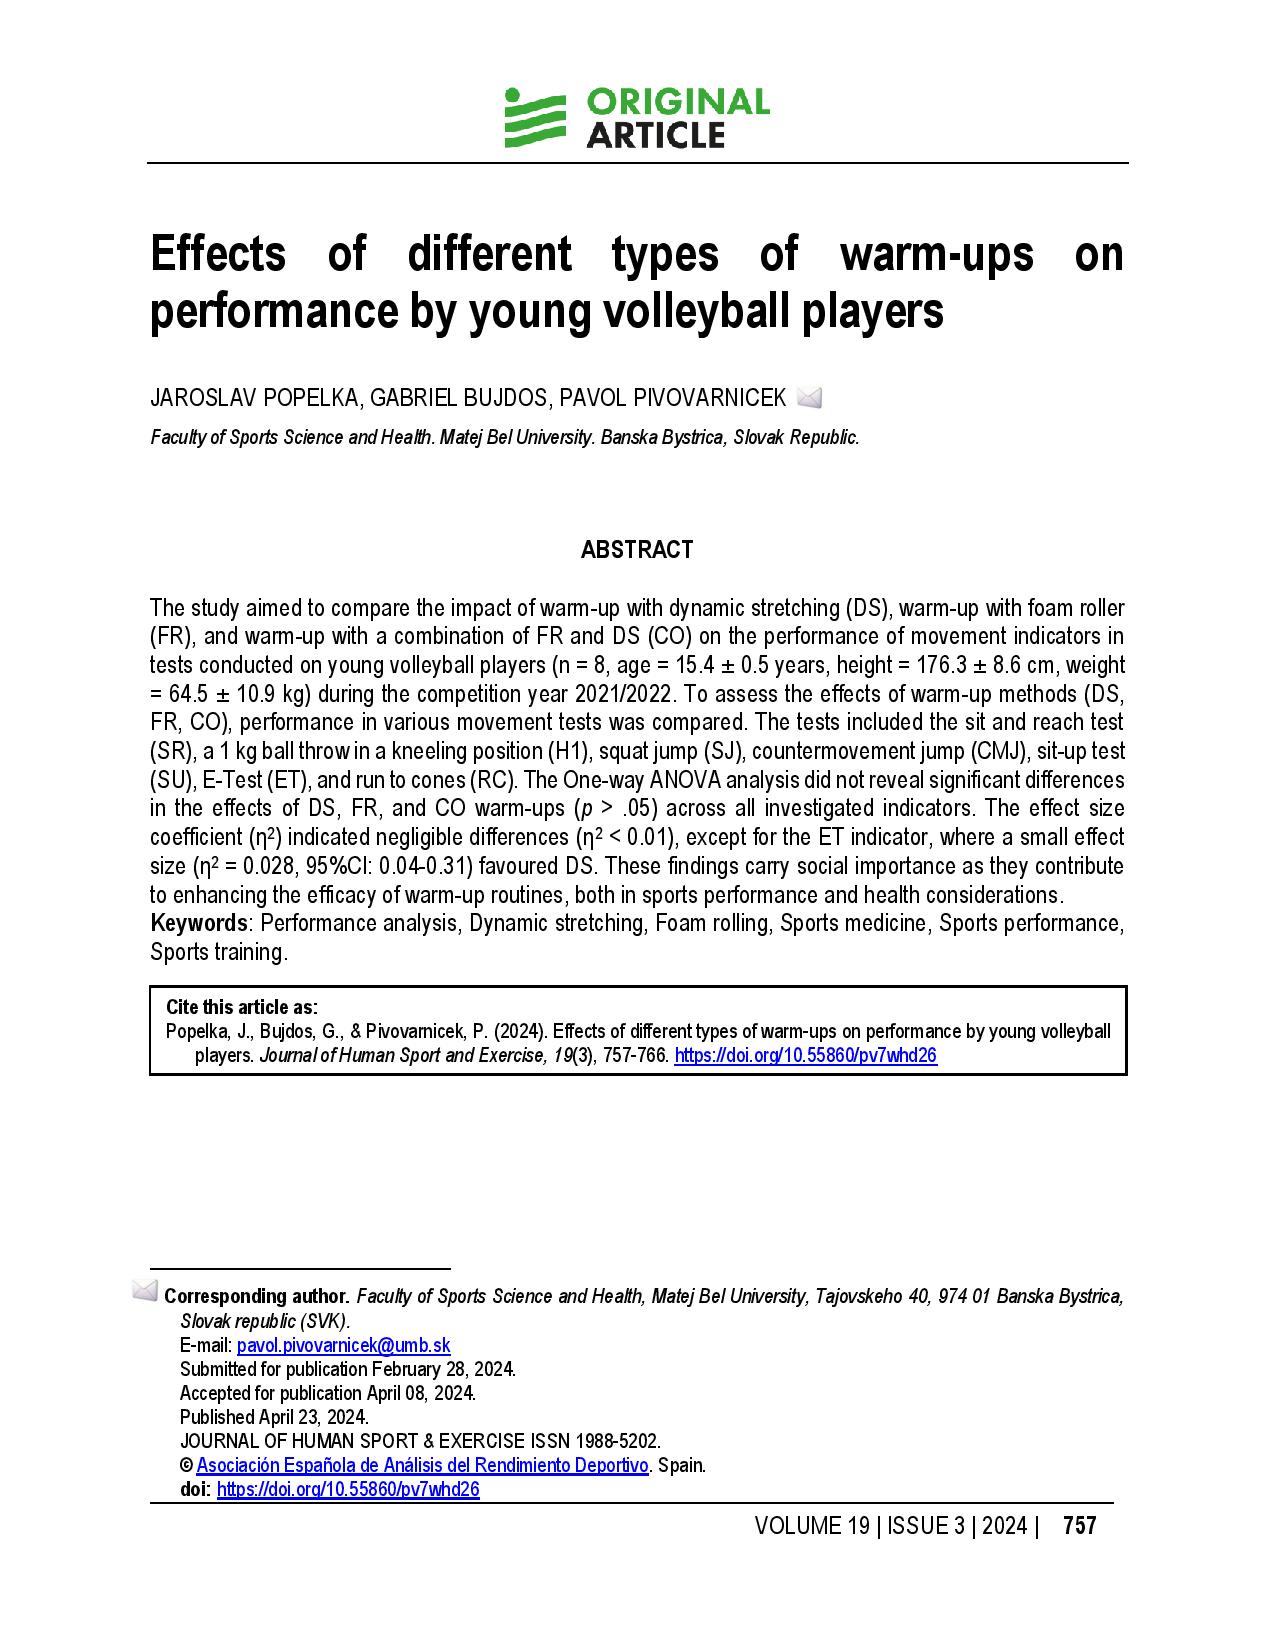 Effects of different types of warm-ups on performance by young volleyball players